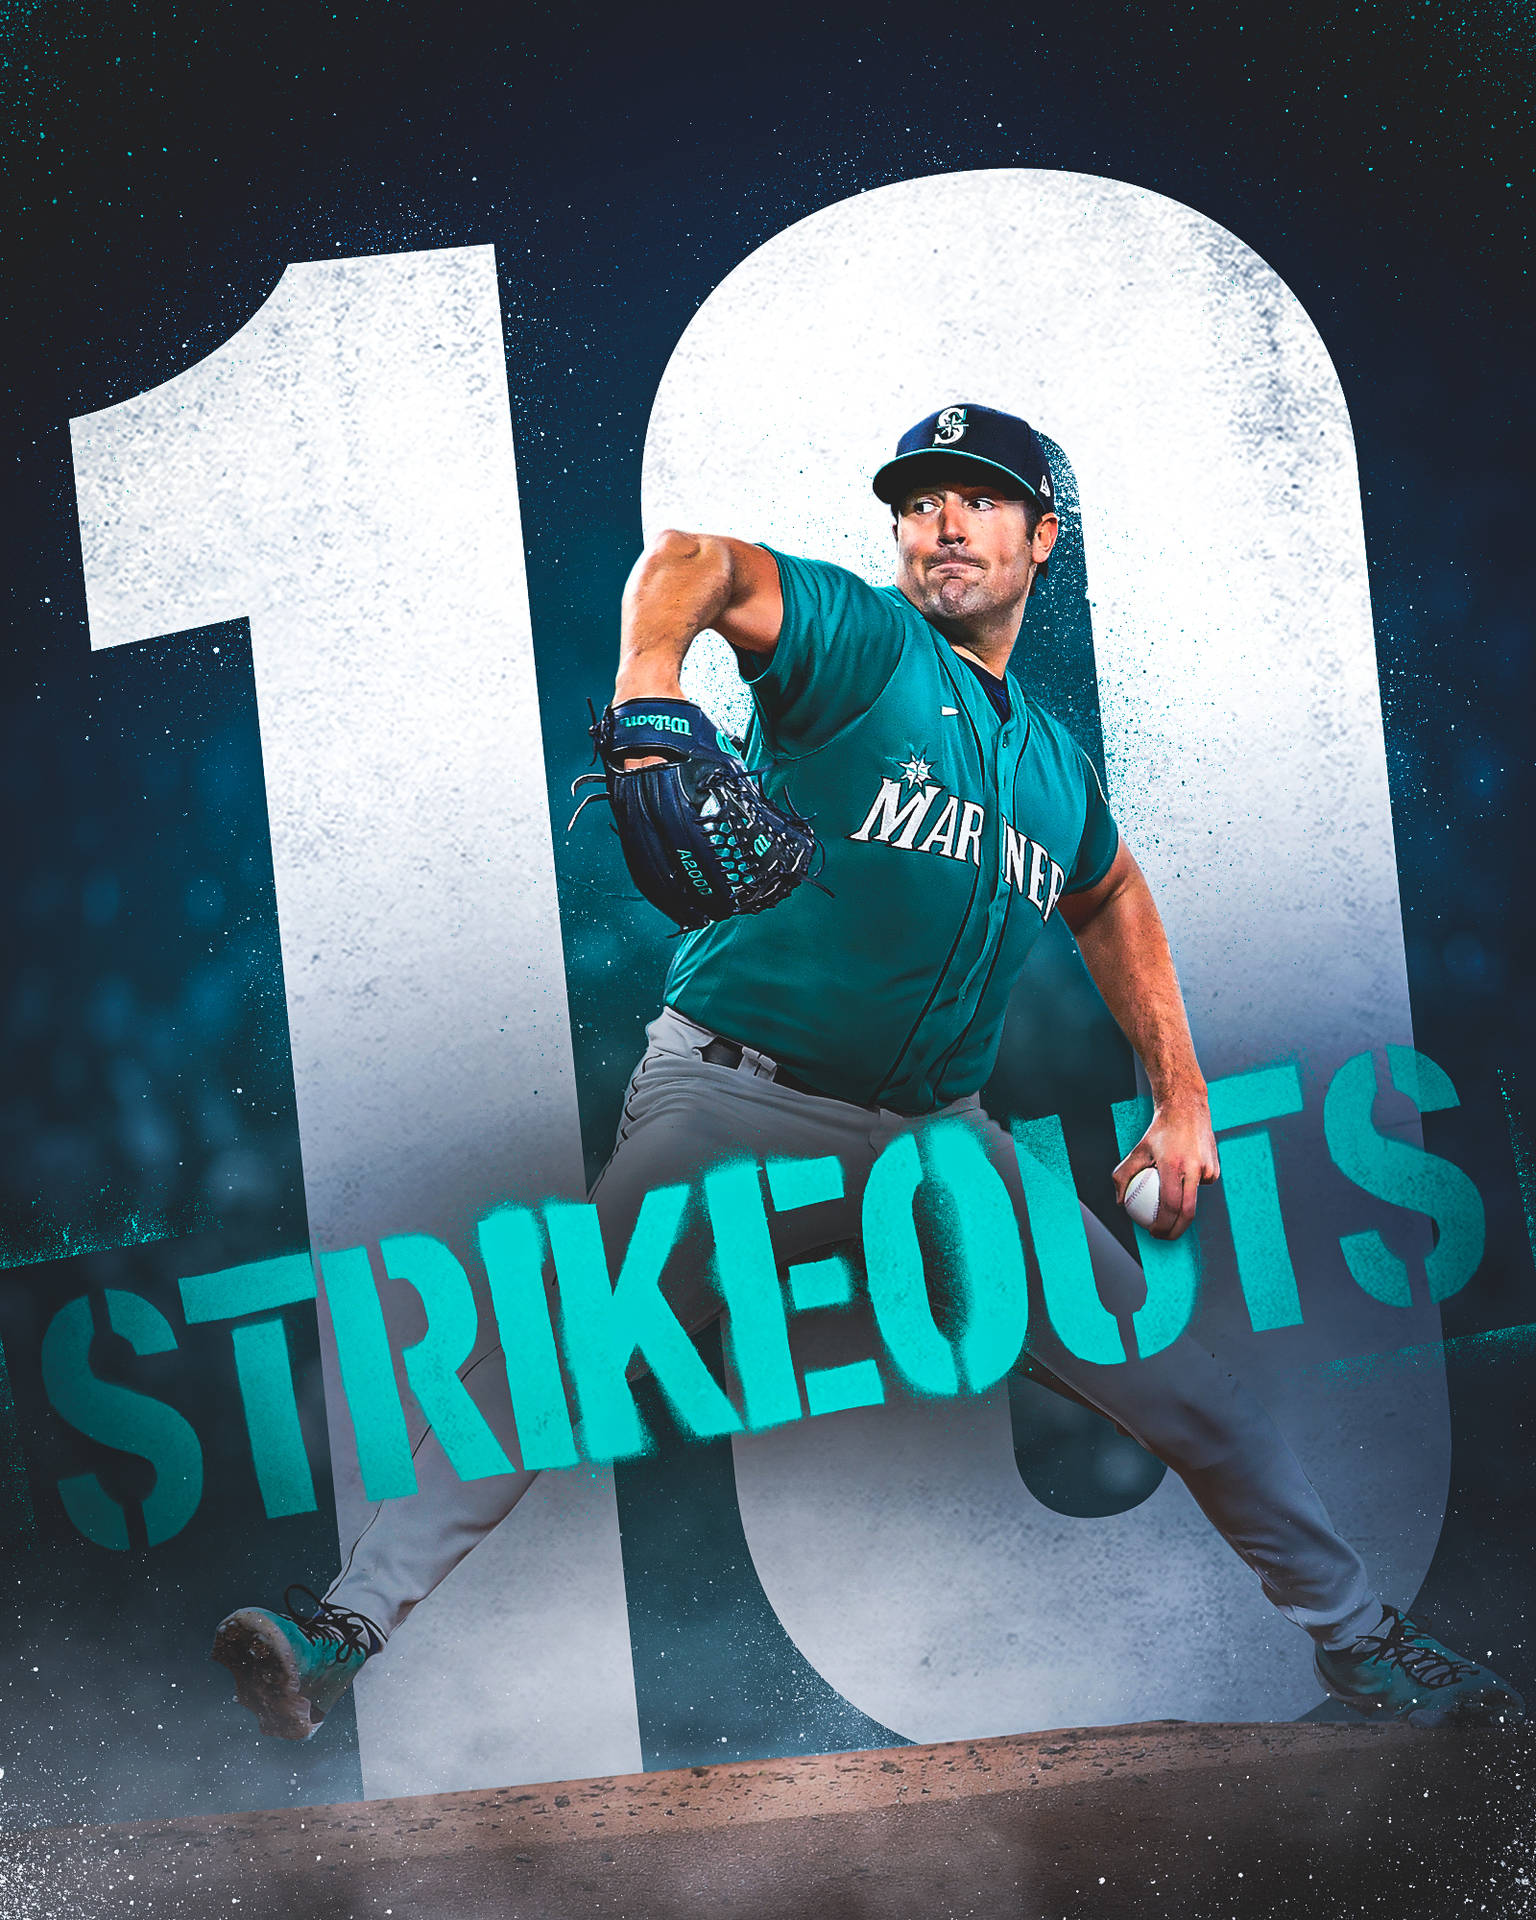 Robbie Ray 10 Strikeouts Poster Wallpaper